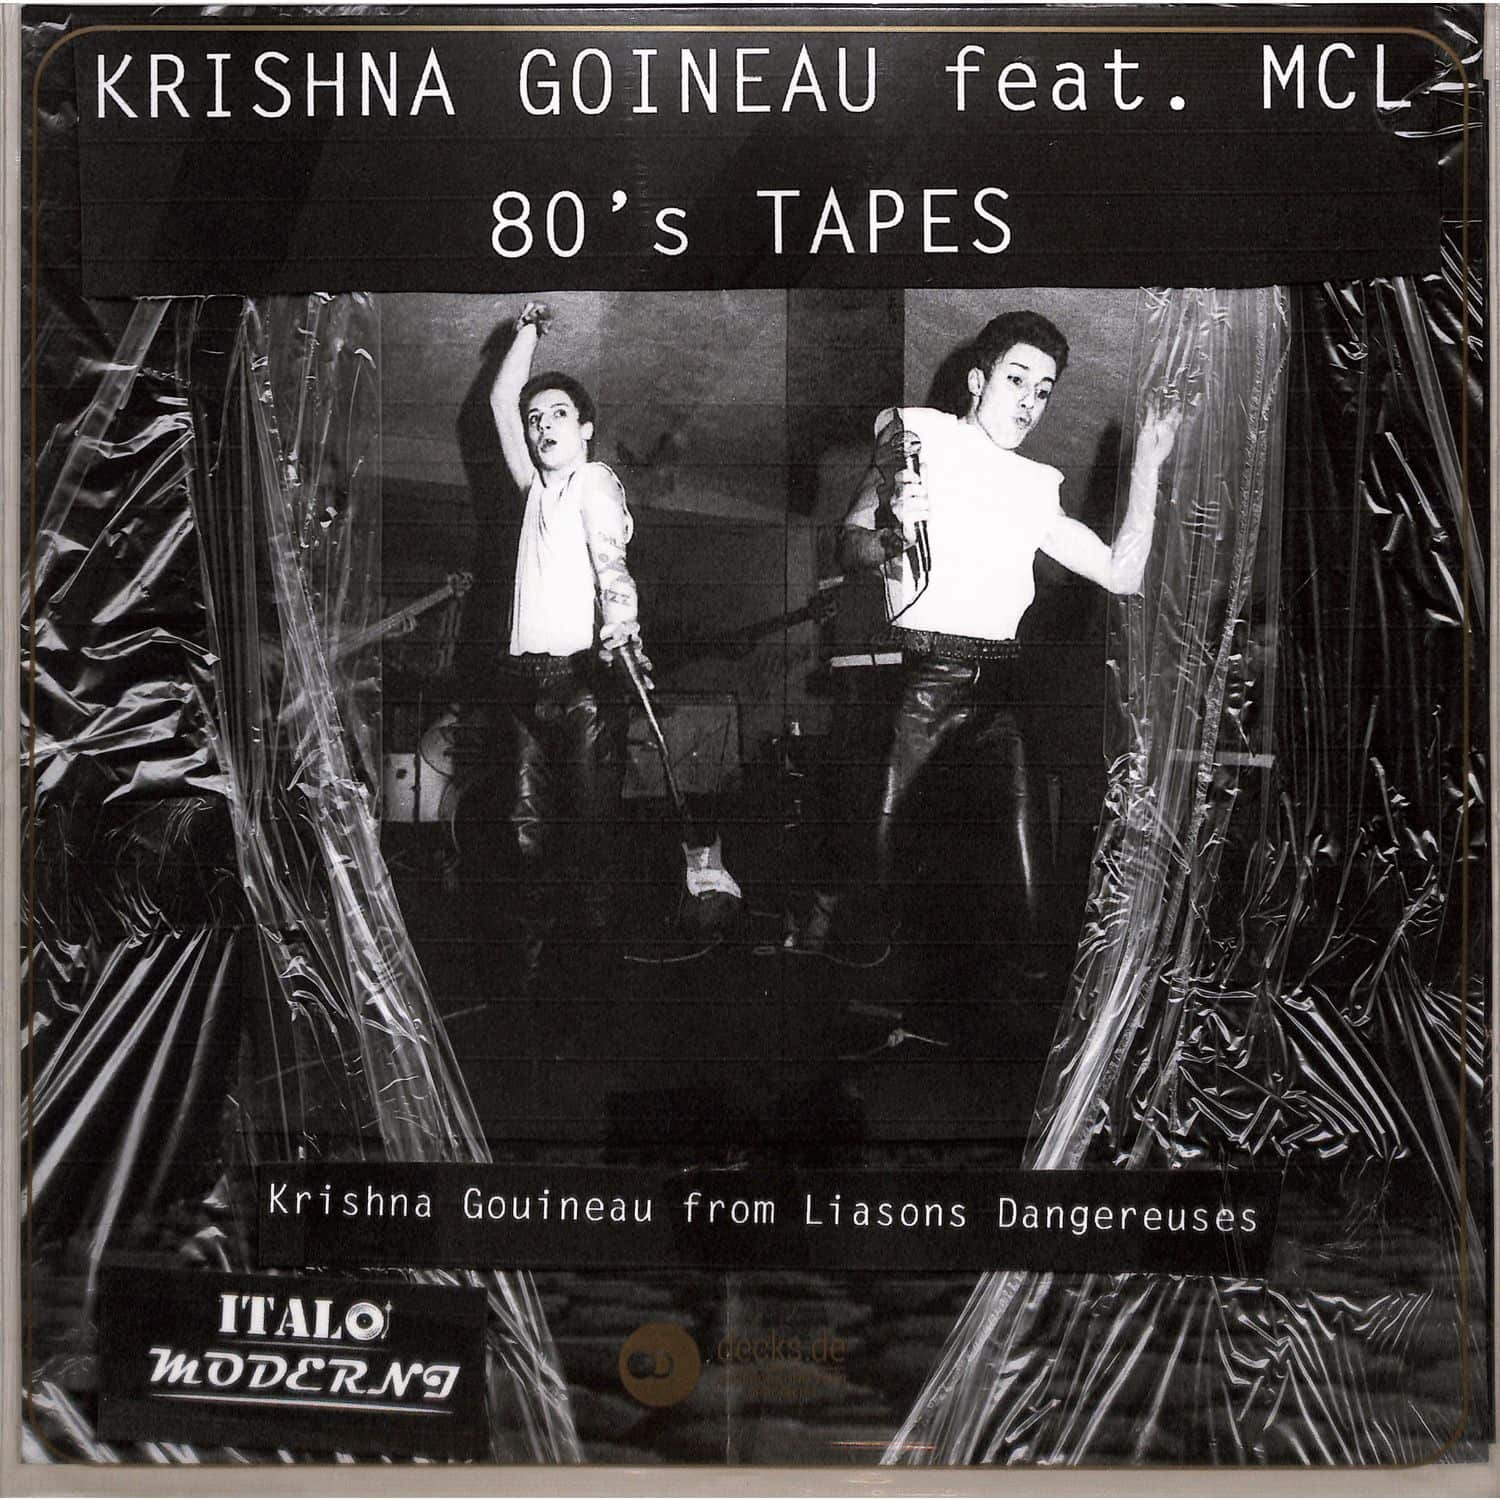 KRISHNA GOINEAU FEAT. MCL - 80S TAPES EP